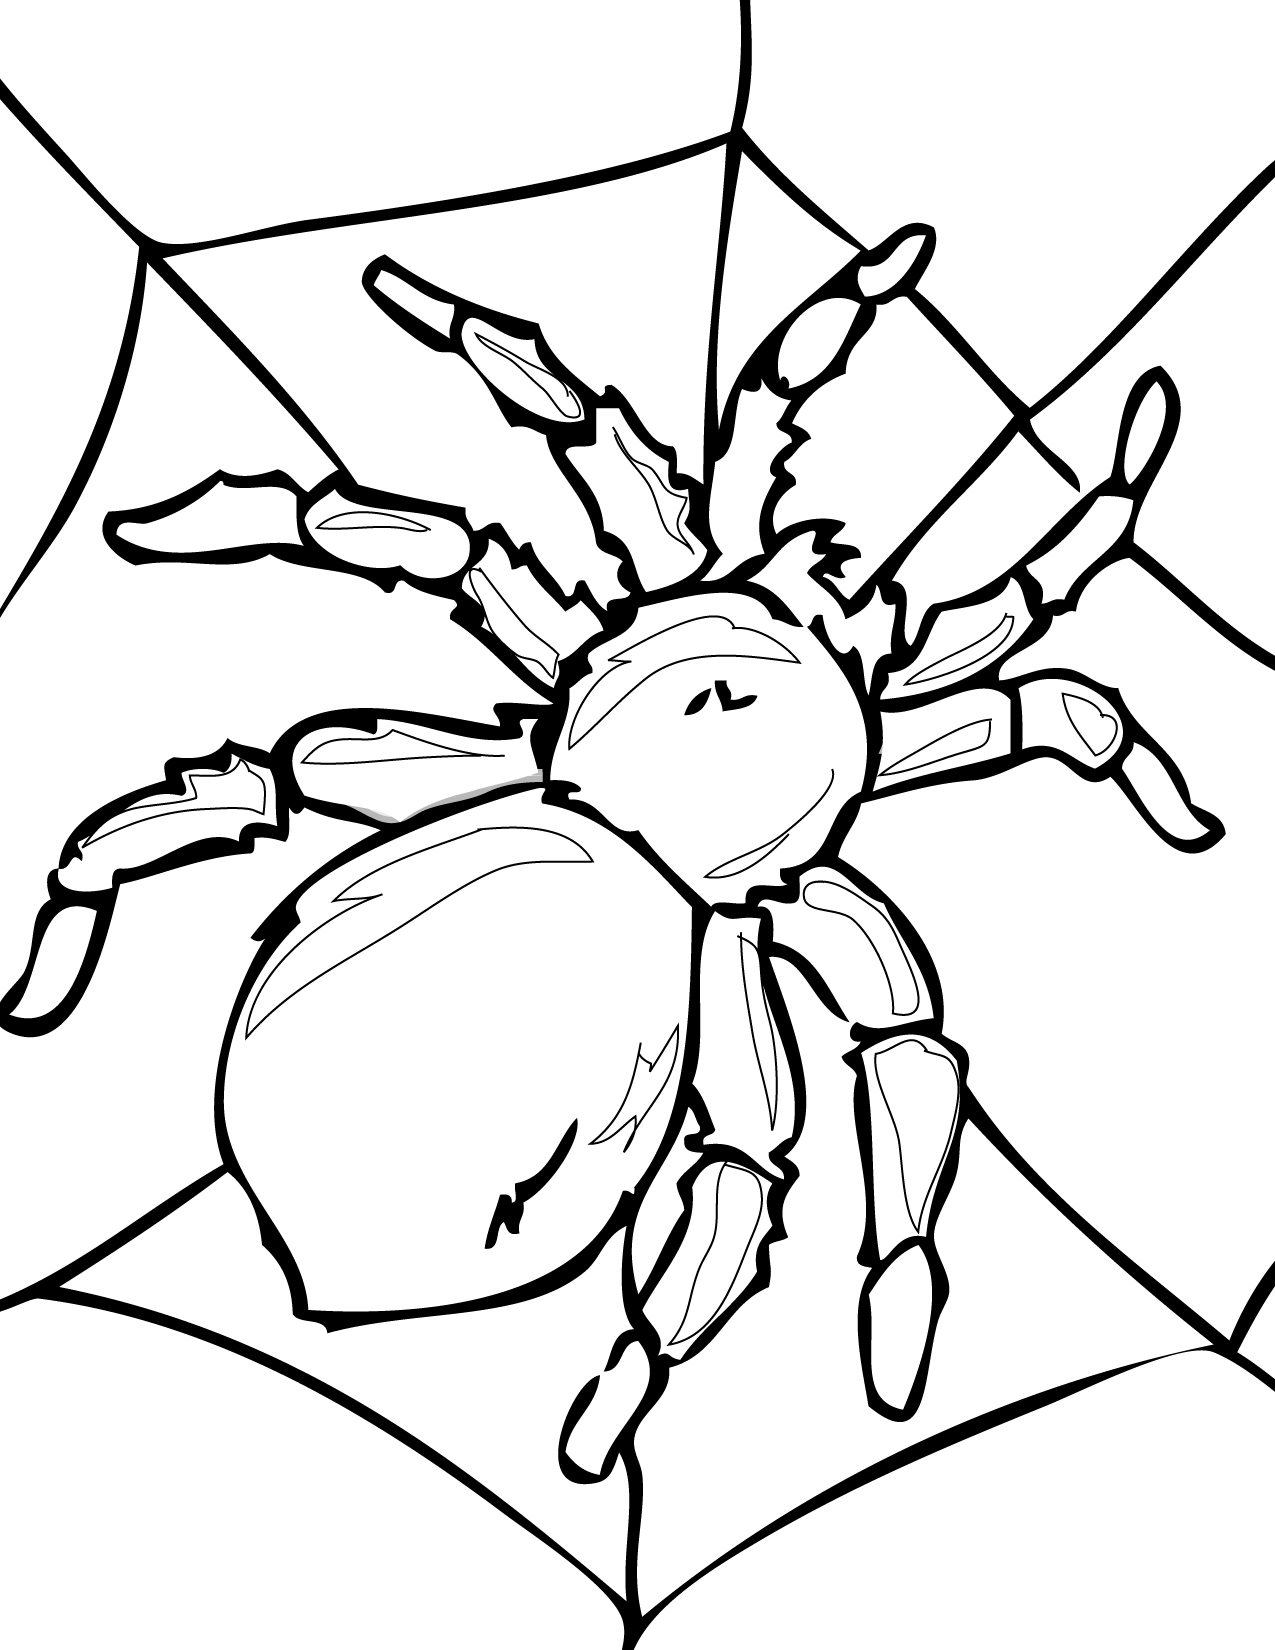 insects coloring pages printable id 88883 : Uncategorized - yoand.